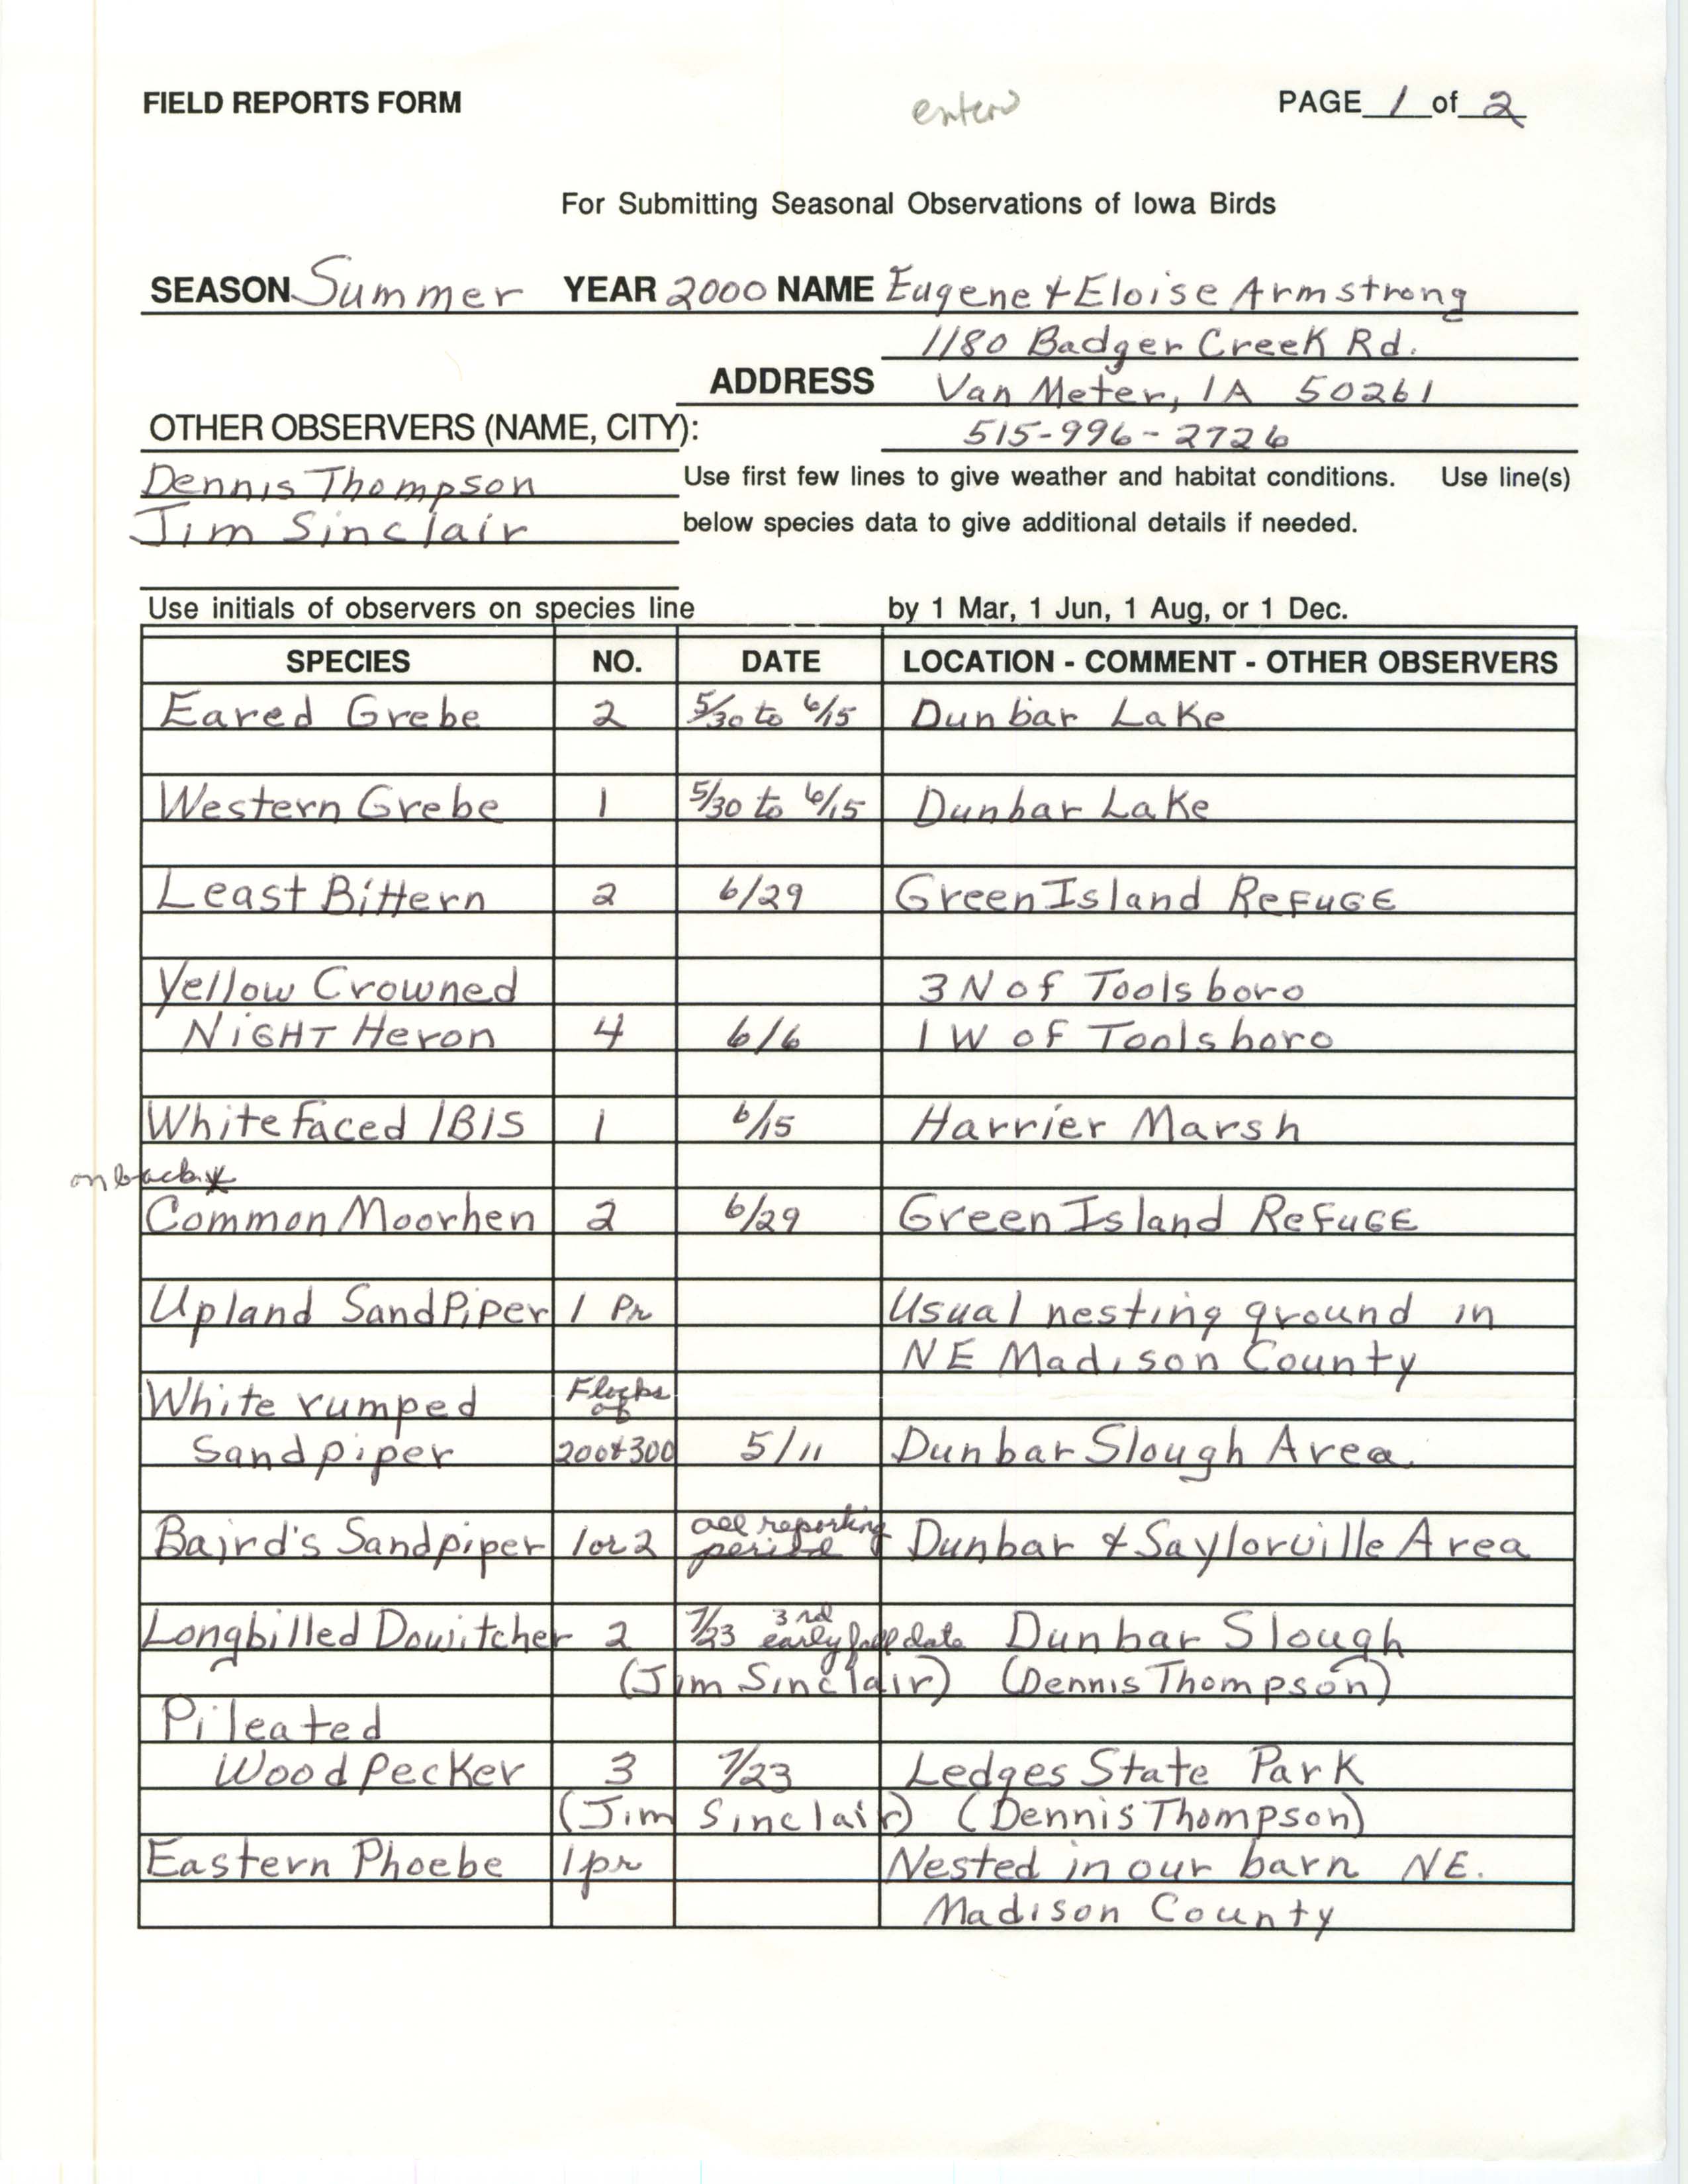 Field reports form for submitting seasonal observations of Iowa birds, Eugene Armstrong and Eloise Armstrong, summer 2000